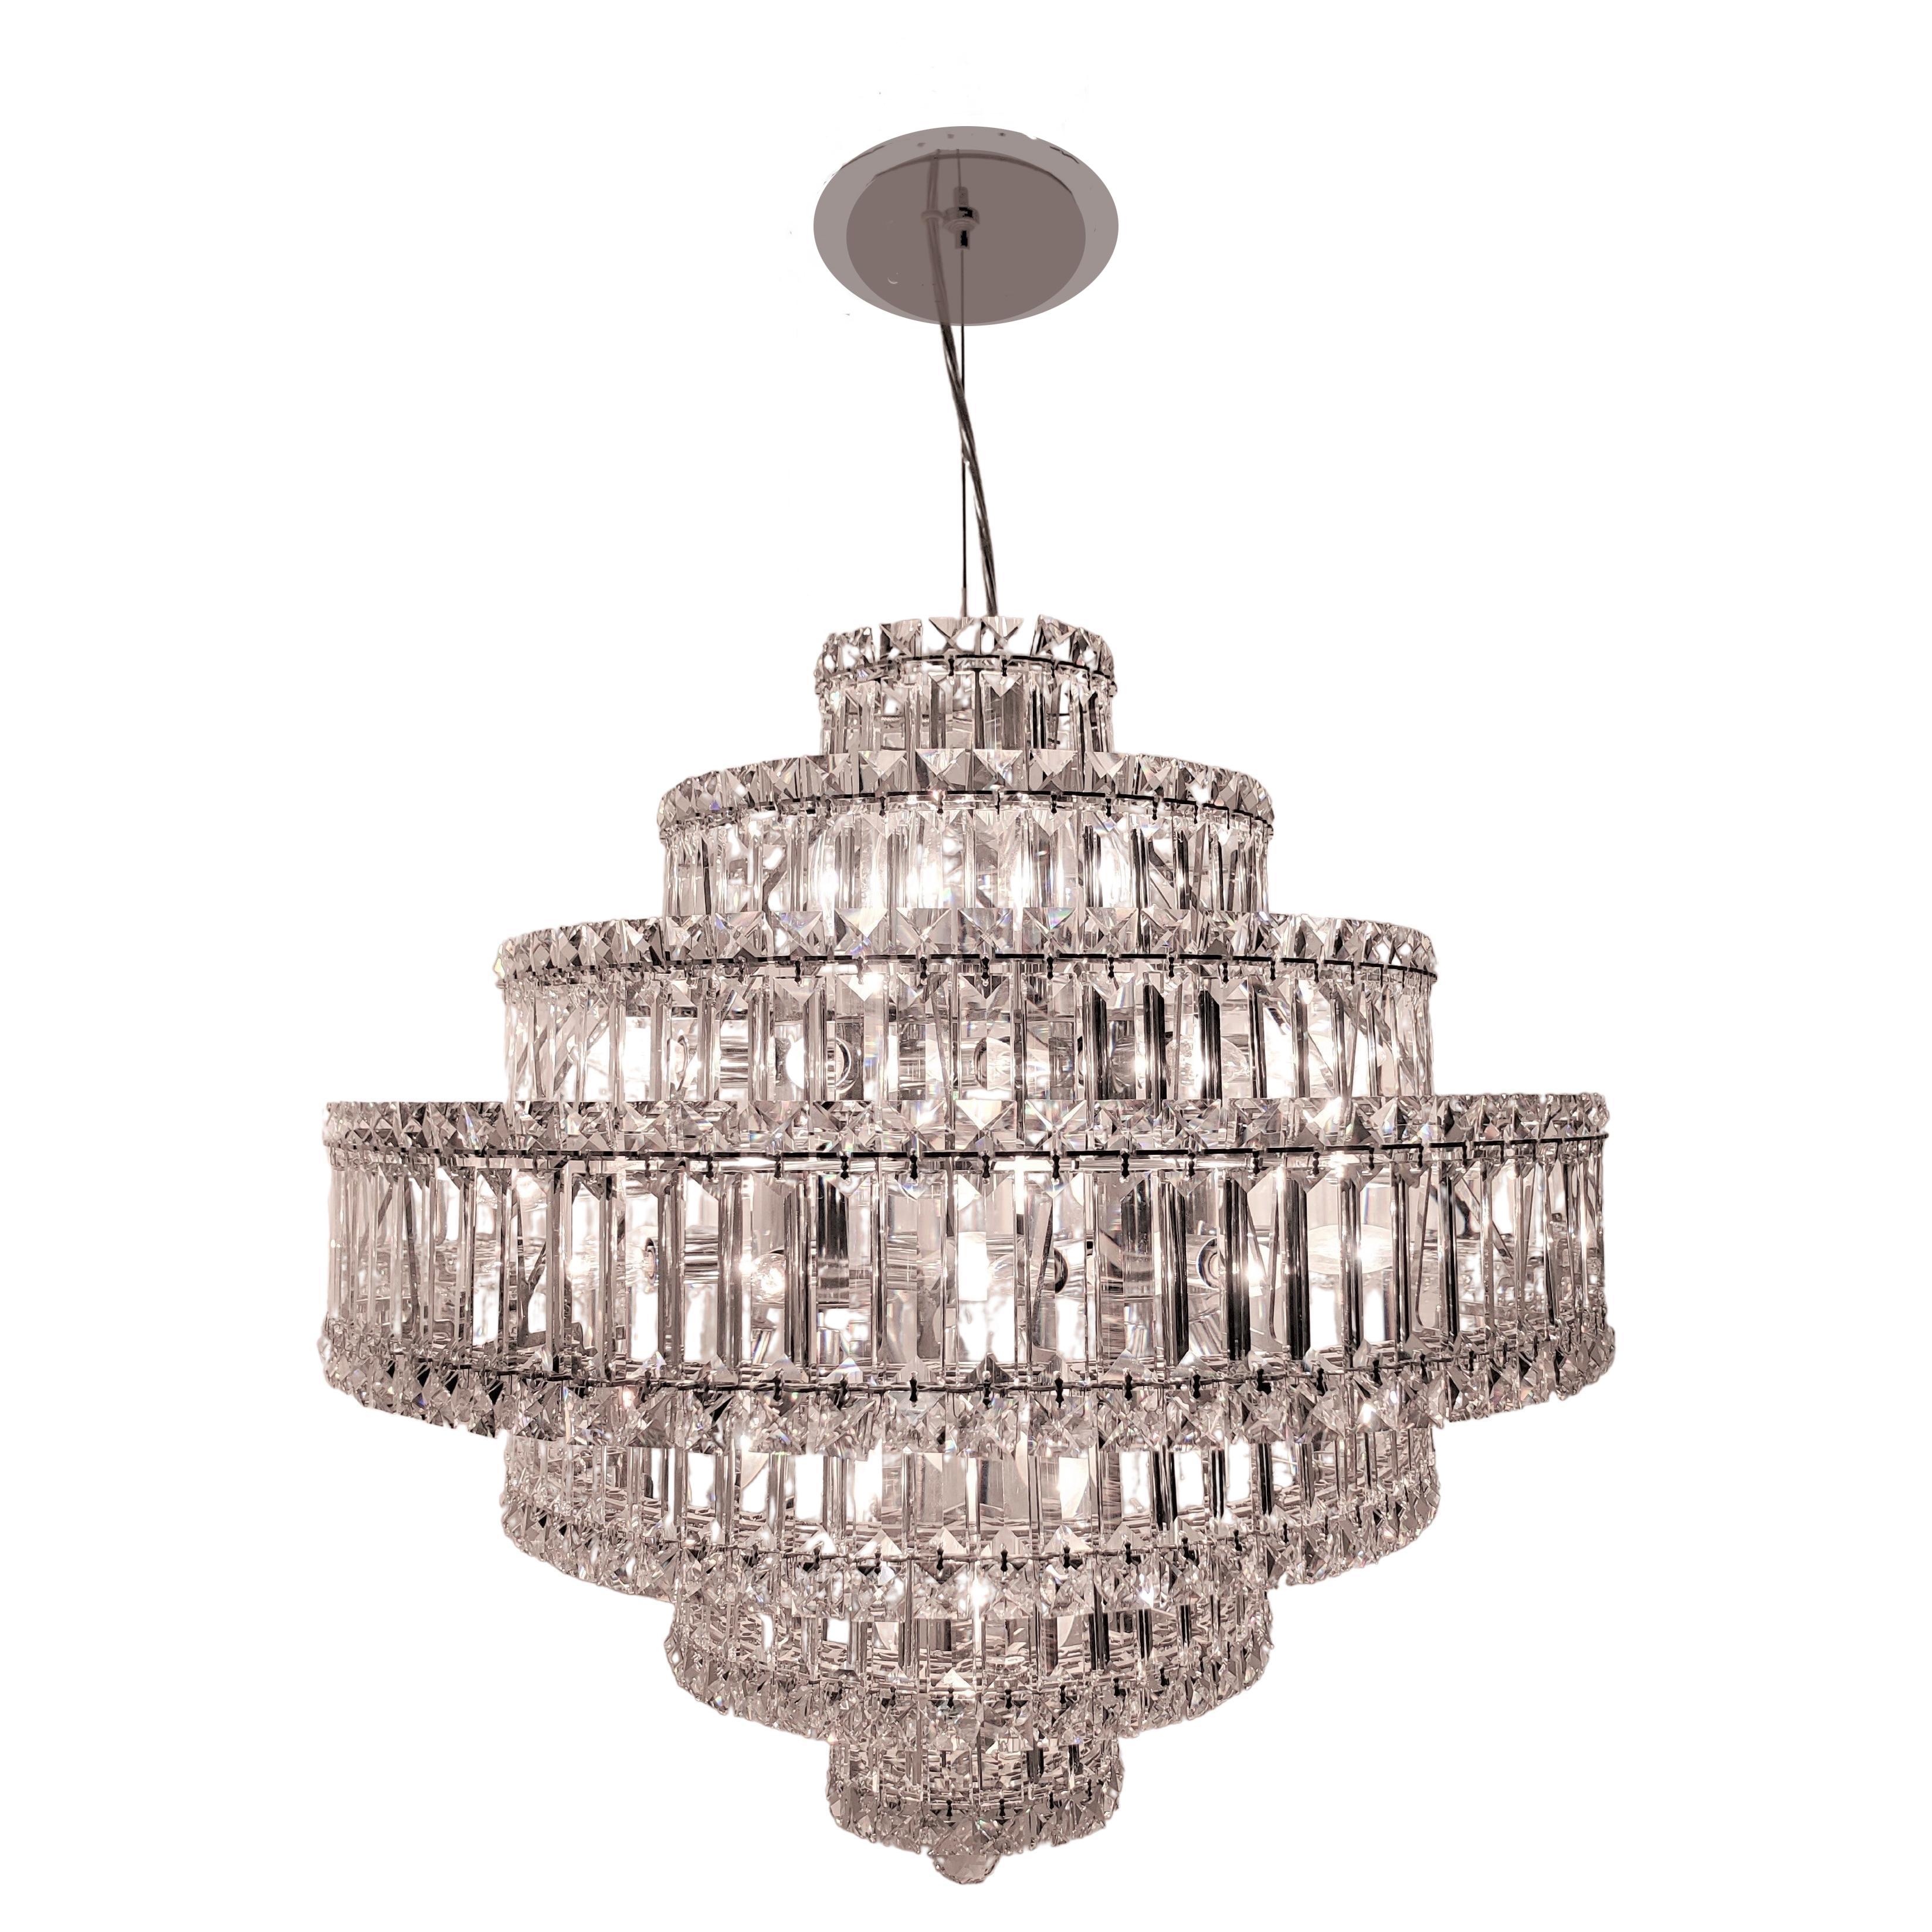 The dazzling Plaza pendant crystal chandelier designed by Schonbek
exudes elegance as it is adorned with highly shimmering square and rectangular Swarovski crystal gems. Its sleek geometric construction and stepped multi -tiered waterfall design